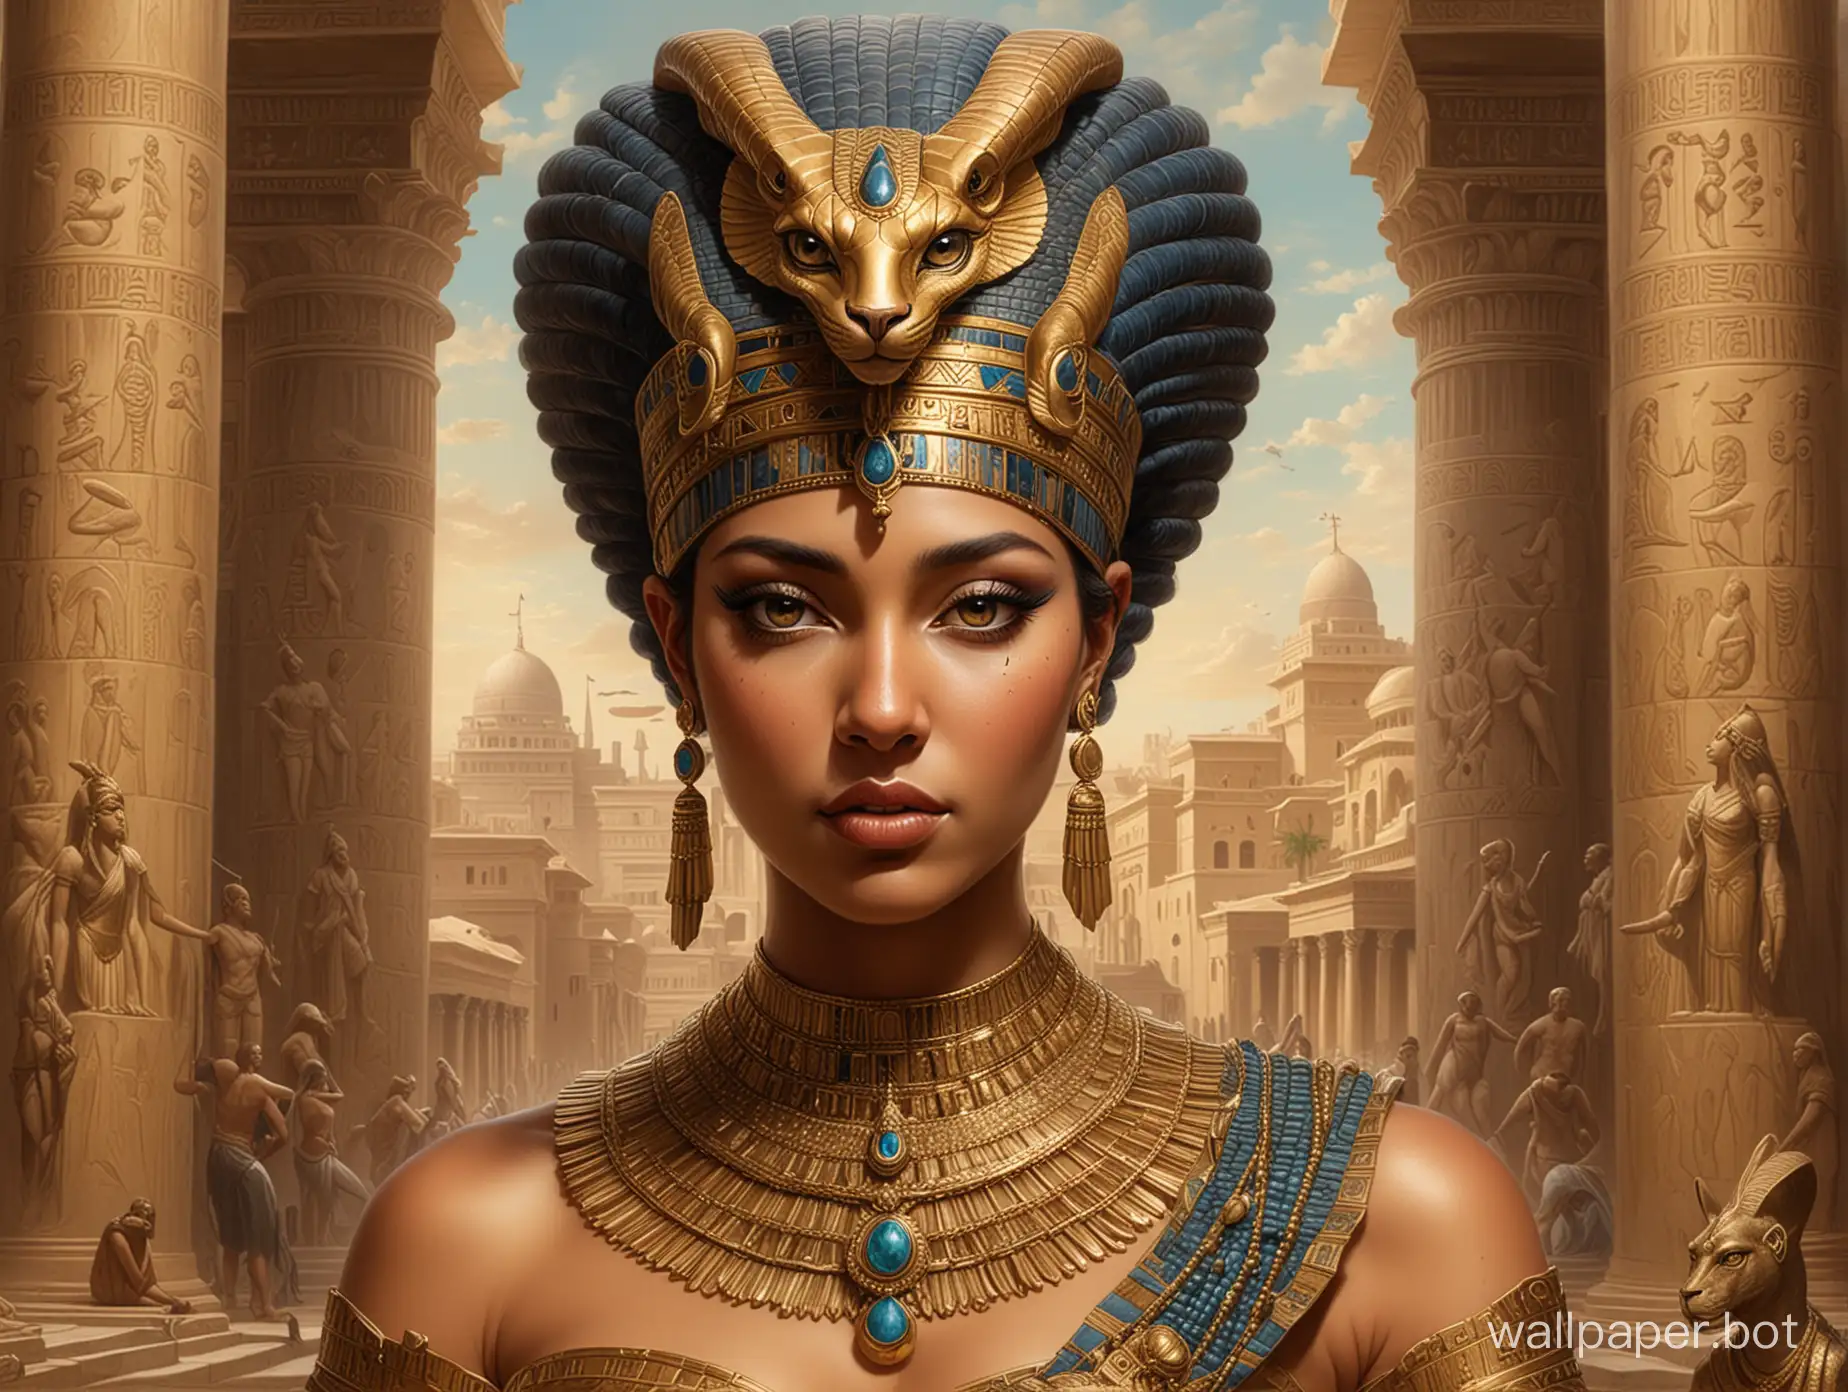 Regal-Cleopatra-Ancient-Egypt-Queen-in-Gold-Headdress-and-Exquisite-Jewelry